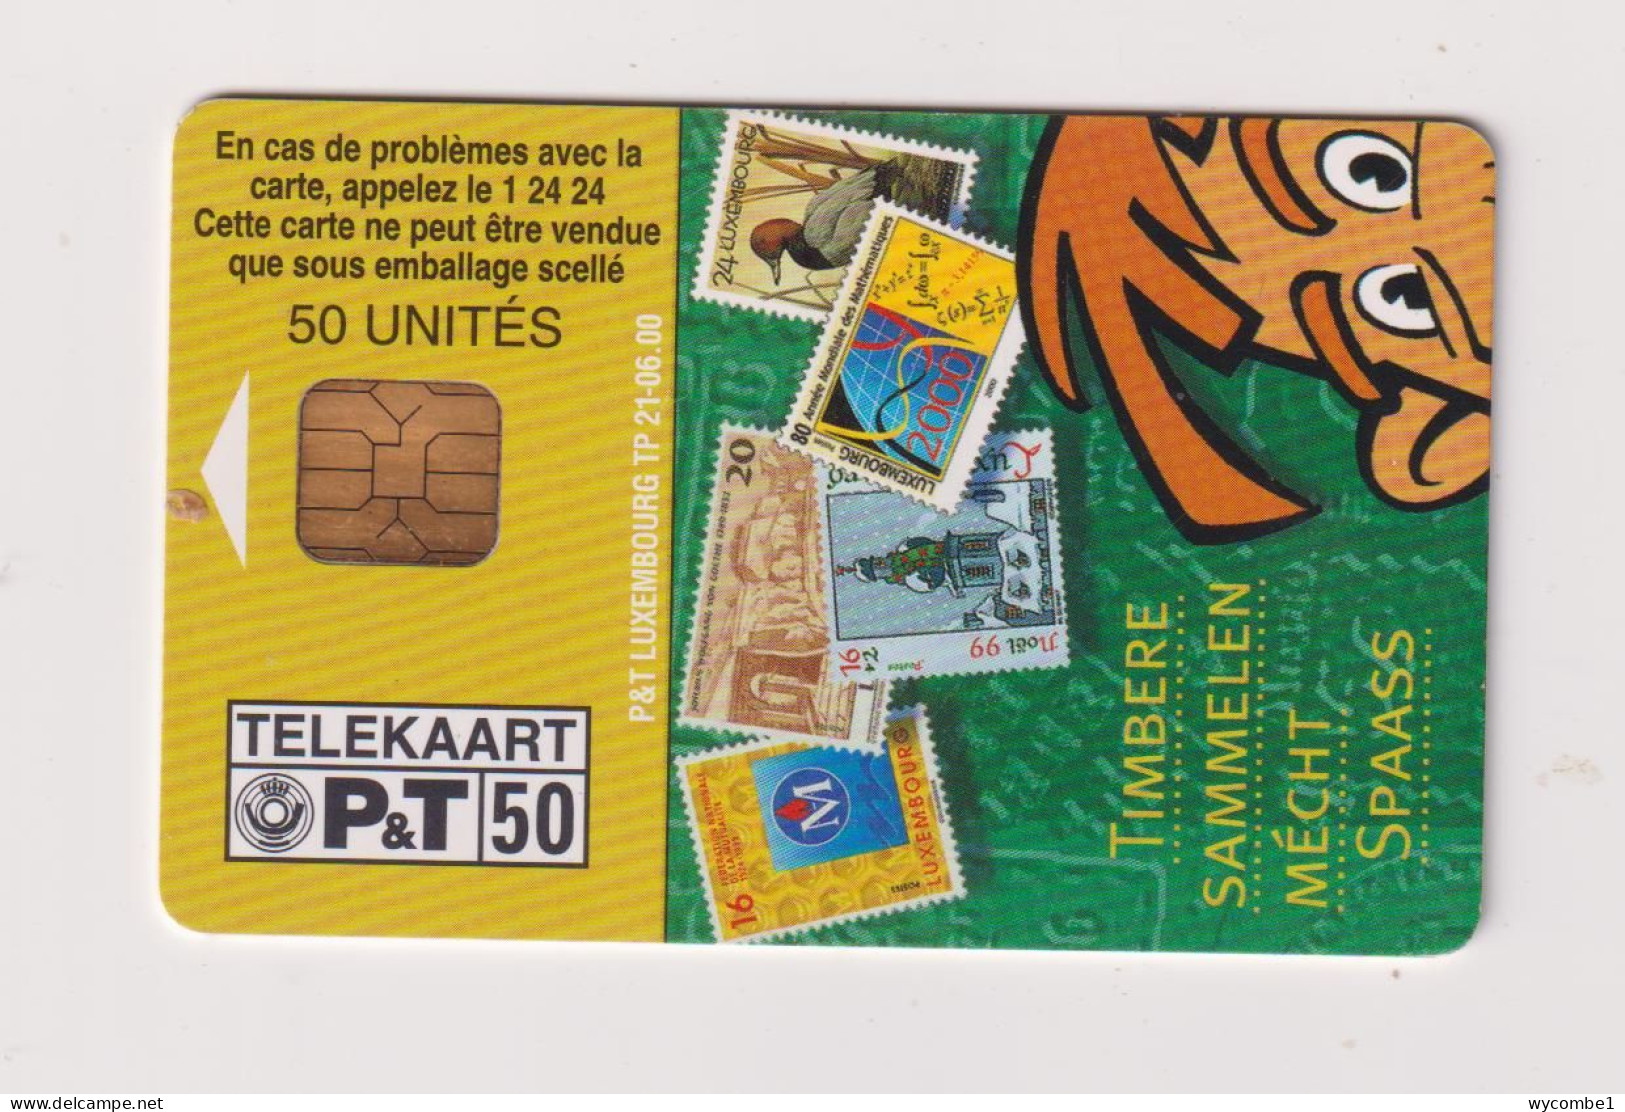 LUXEMBOURG  - Postage Stamps Chip Phonecard - Luxembourg